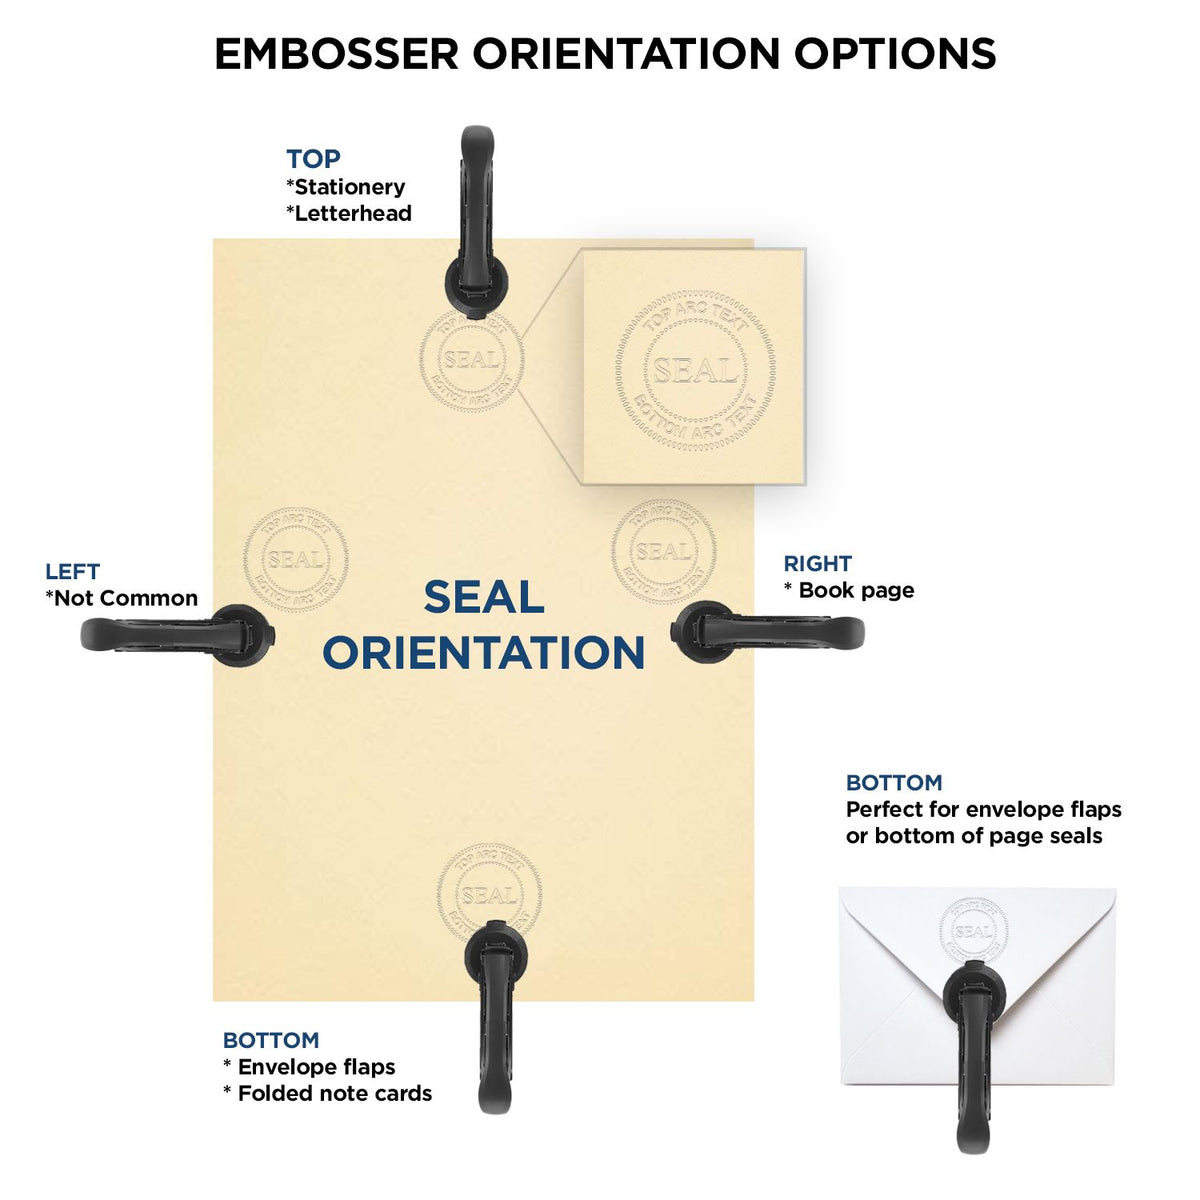 An infographic for the Heavy Duty Cast Iron Oklahoma Geologist Seal Embosser showing embosser orientation, this is showing examples of a top, bottom, right and left insert.